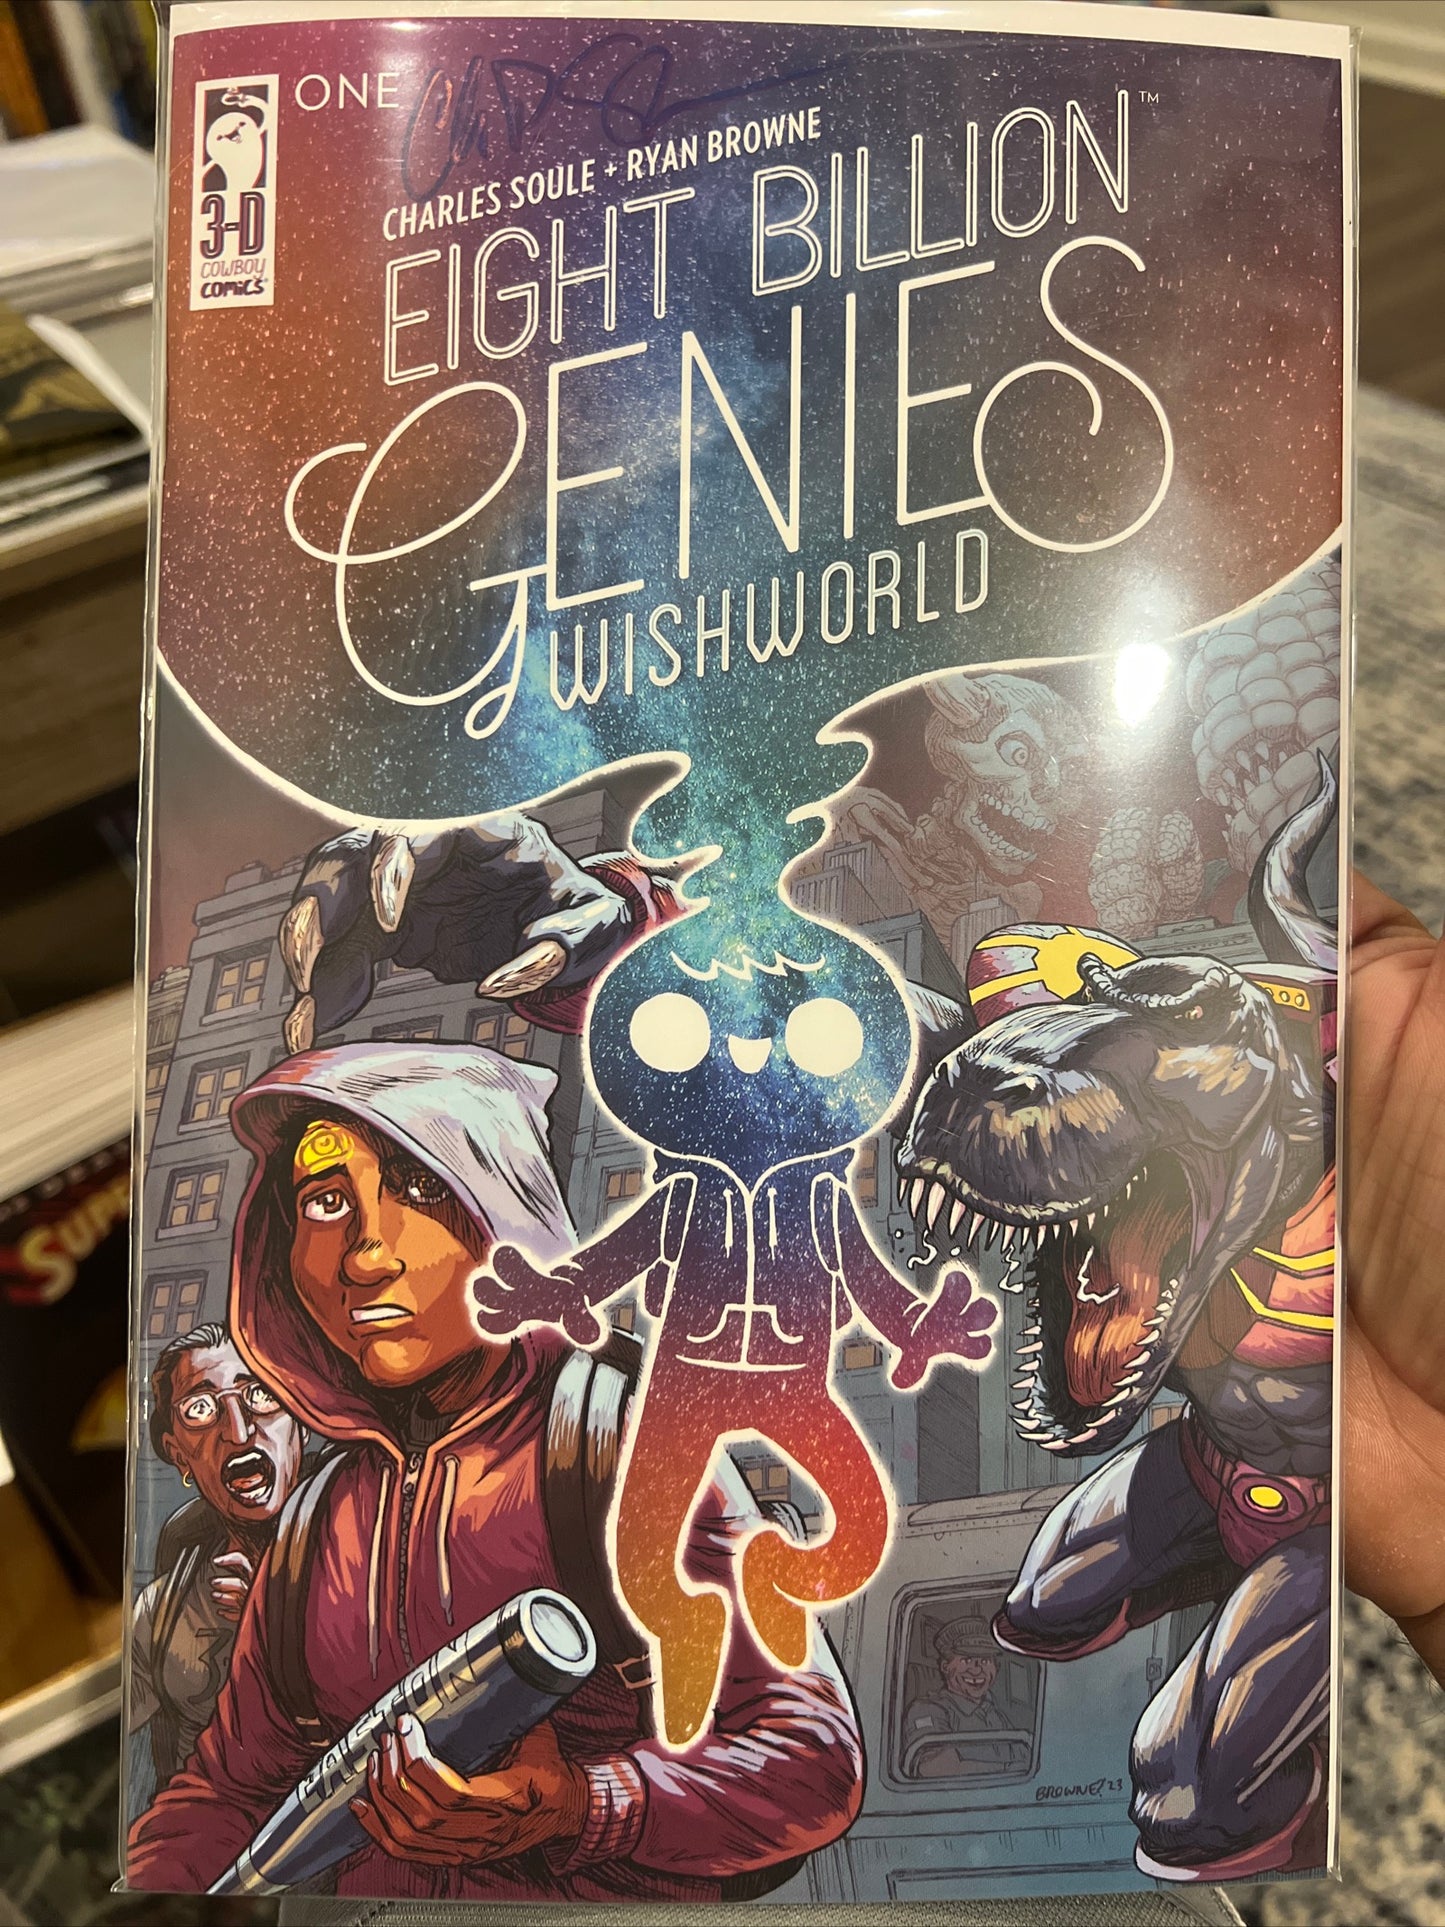 Eight Billion Genies: Wishworld #1 (NYCC 2023 Exclusive LTD 1,000) Signed by Charles Soule